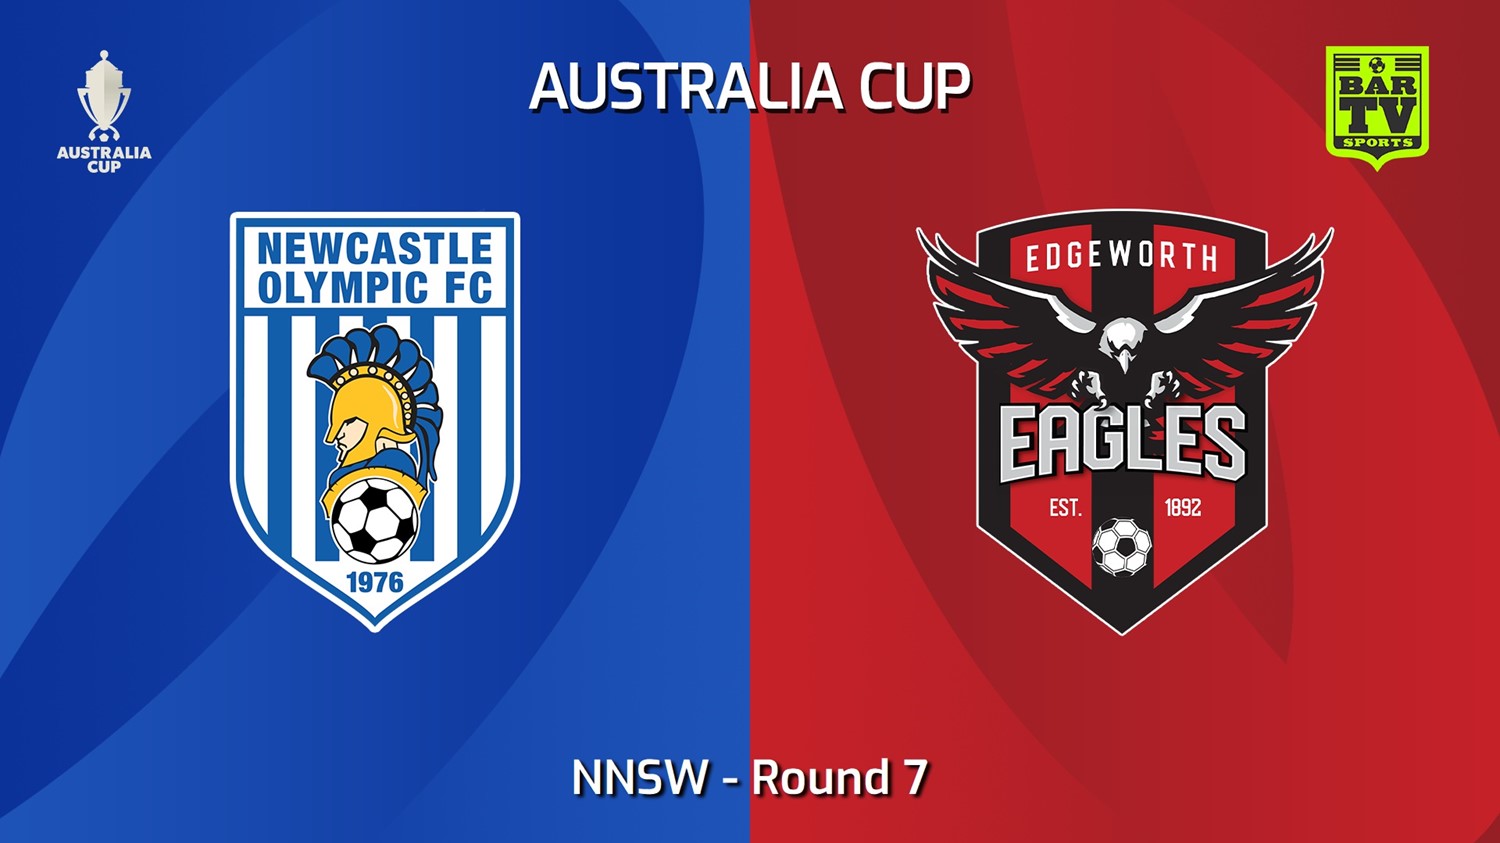 240612-video-Australia Cup Qualifying Northern NSW Round 7 - Newcastle Olympic v Edgeworth Eagles FC Minigame Slate Image